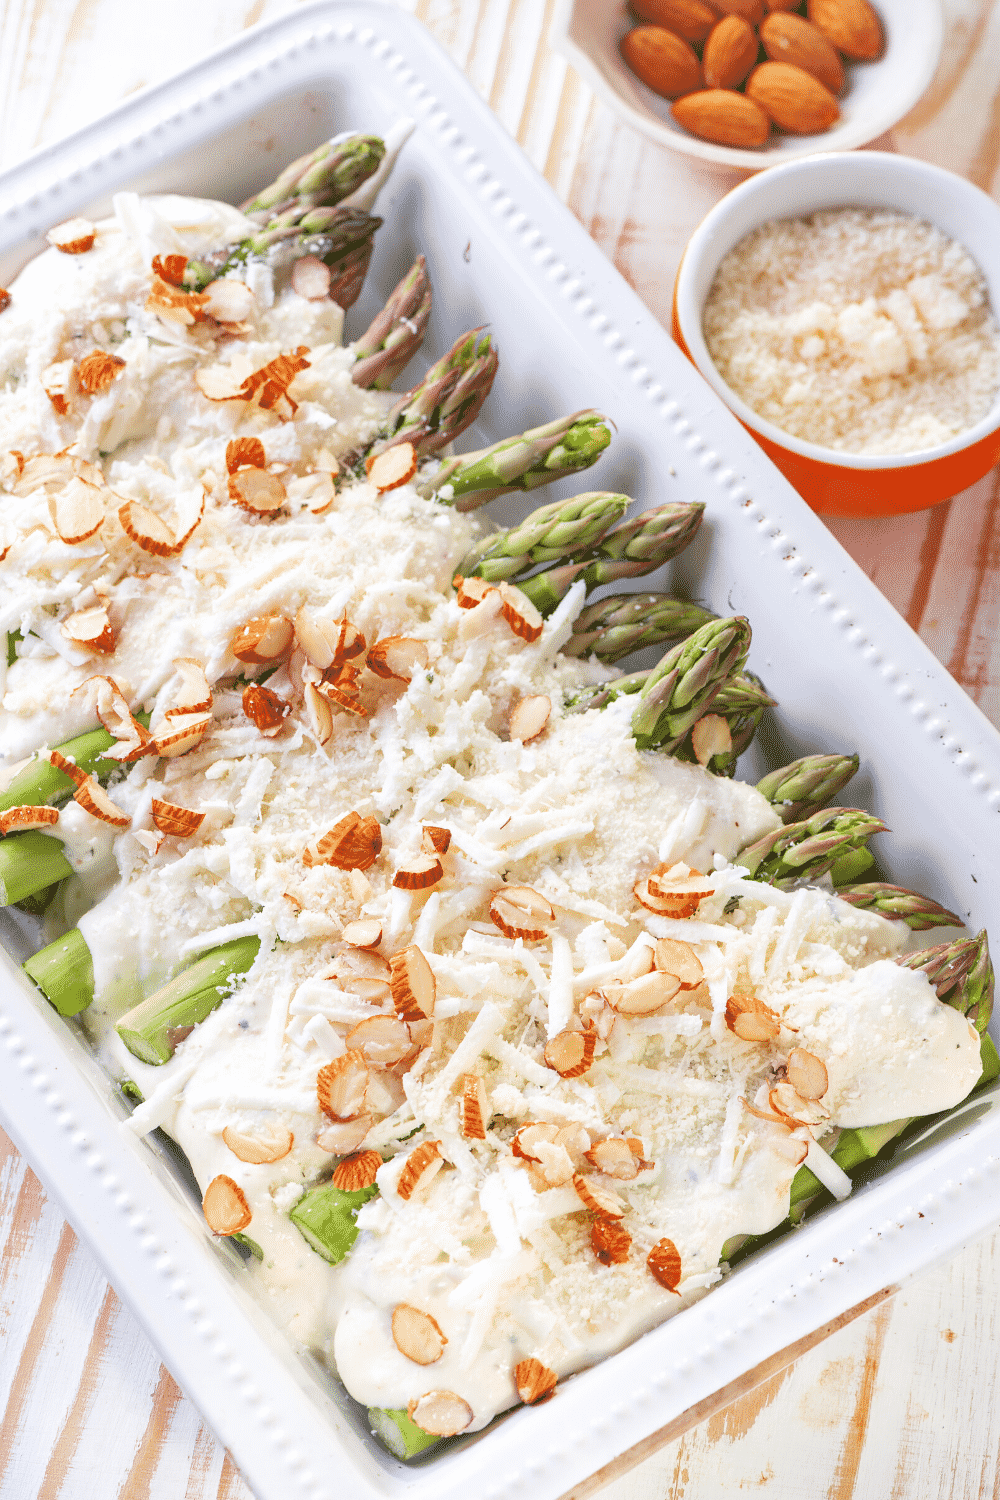 A white casserole dish filled with asparagus topped with a cream sauce, cheese, and sliced almonds.